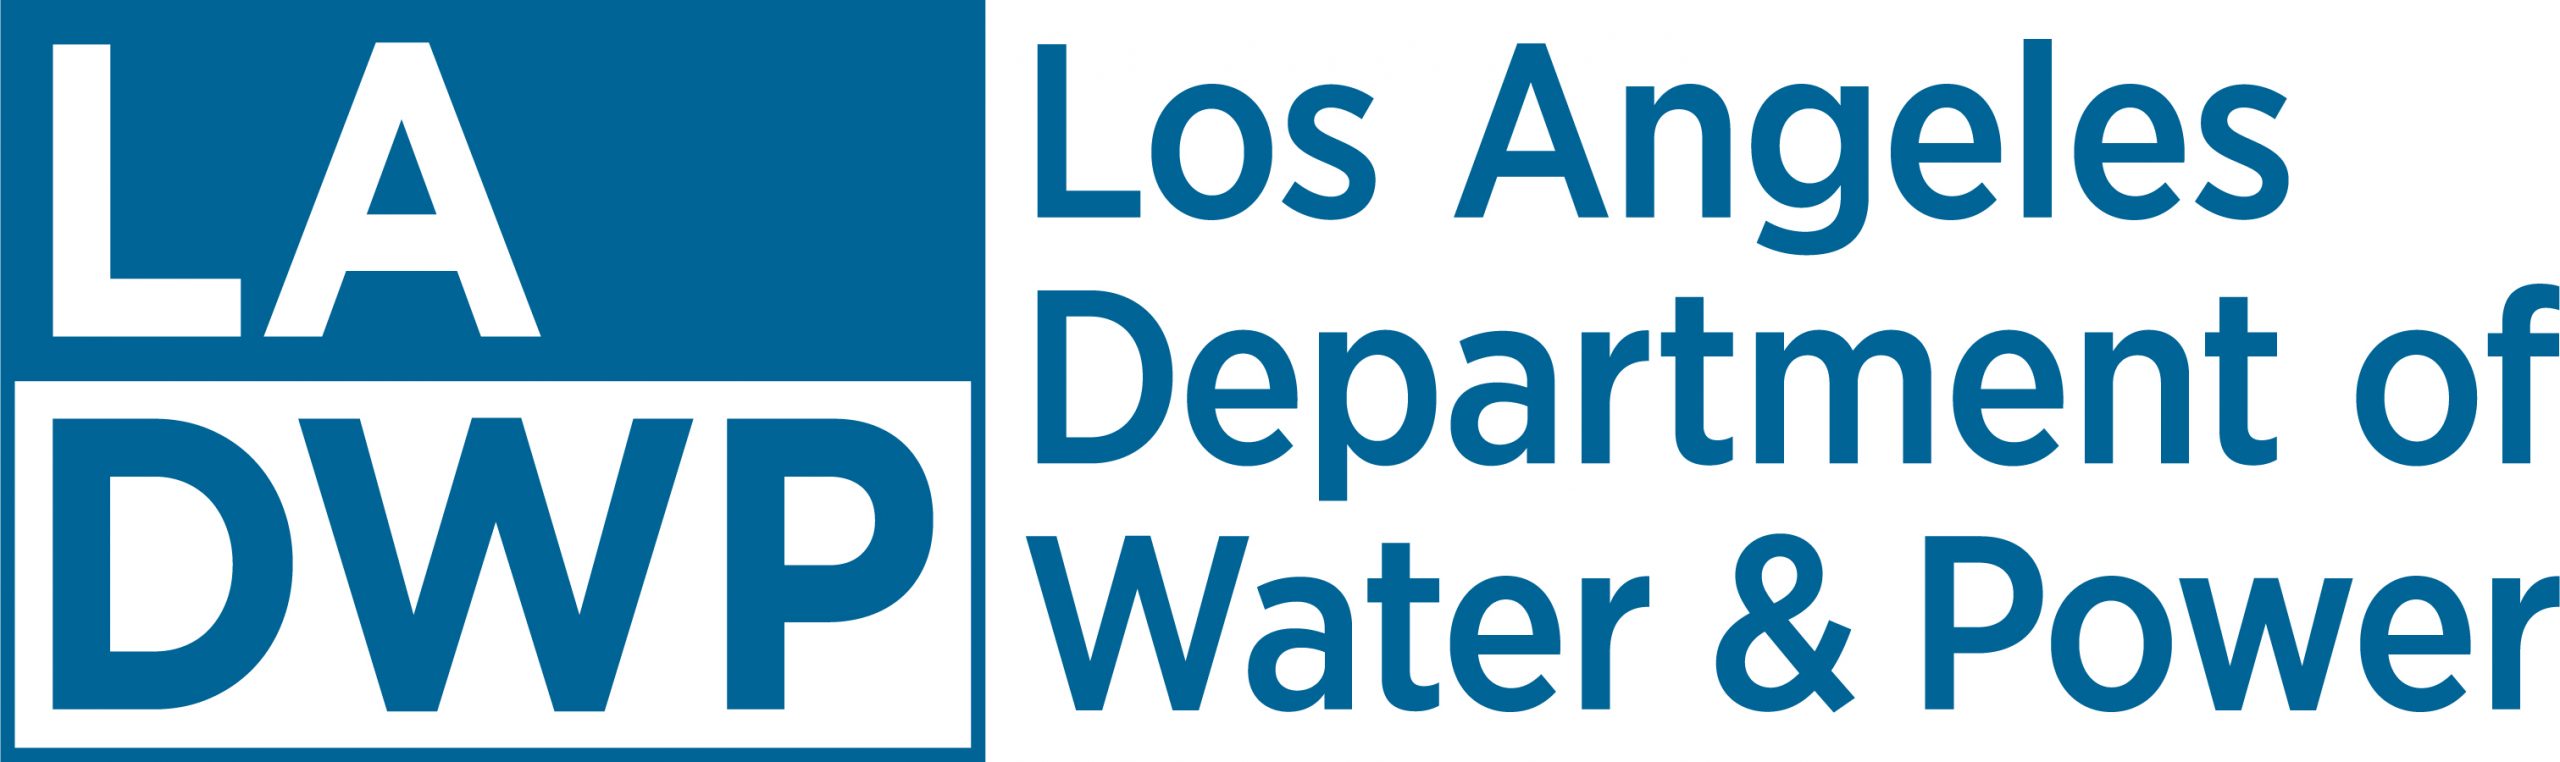 Los Angeles Department of Water and Power Logo